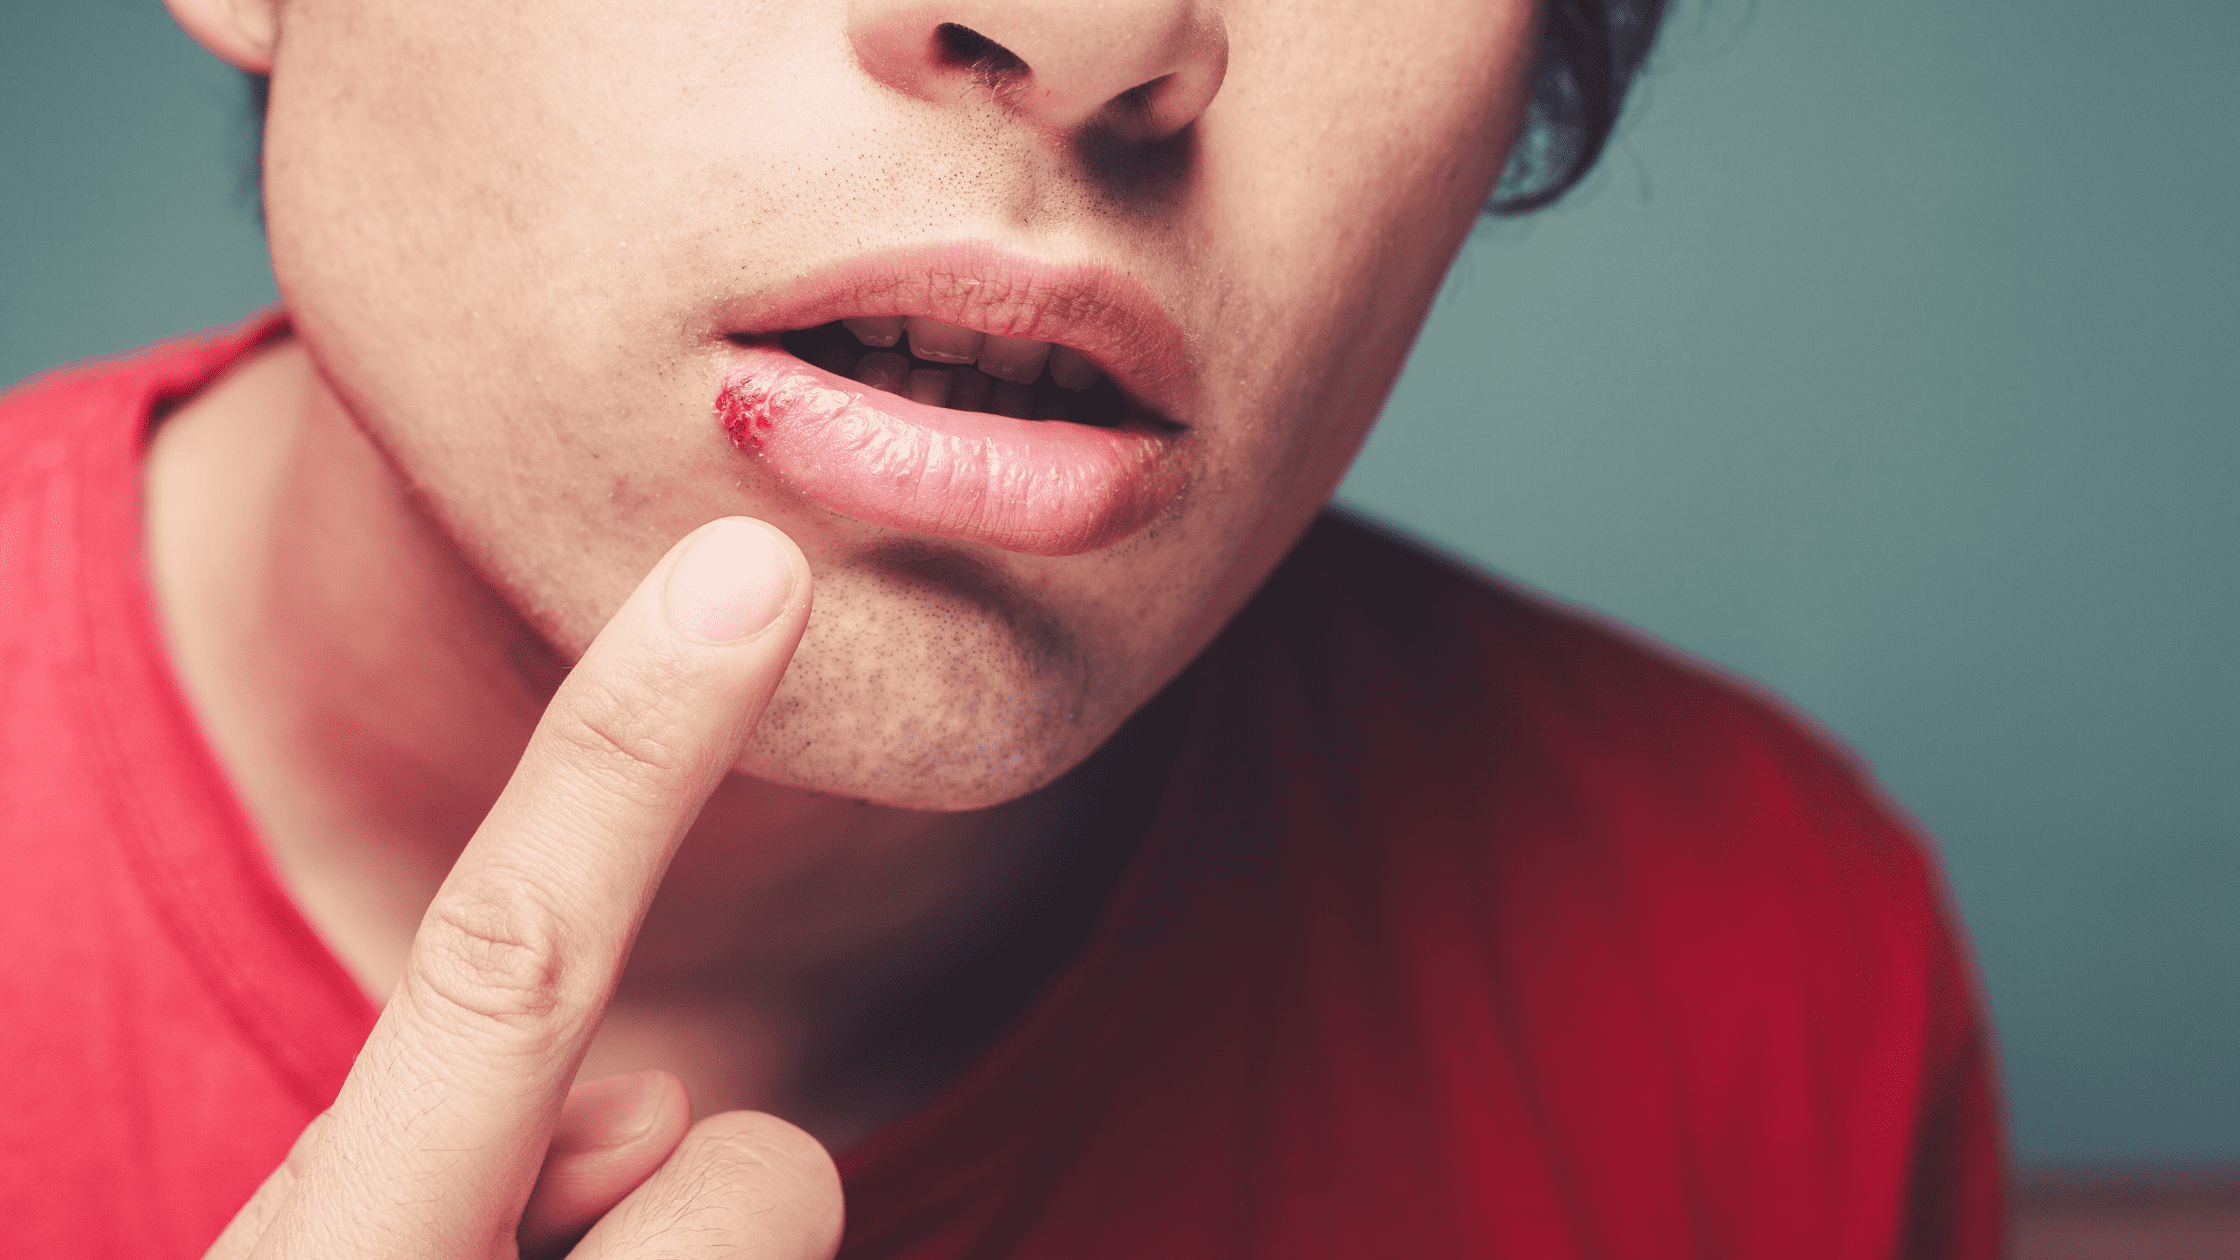 How to Get Rid of a Cold Sore